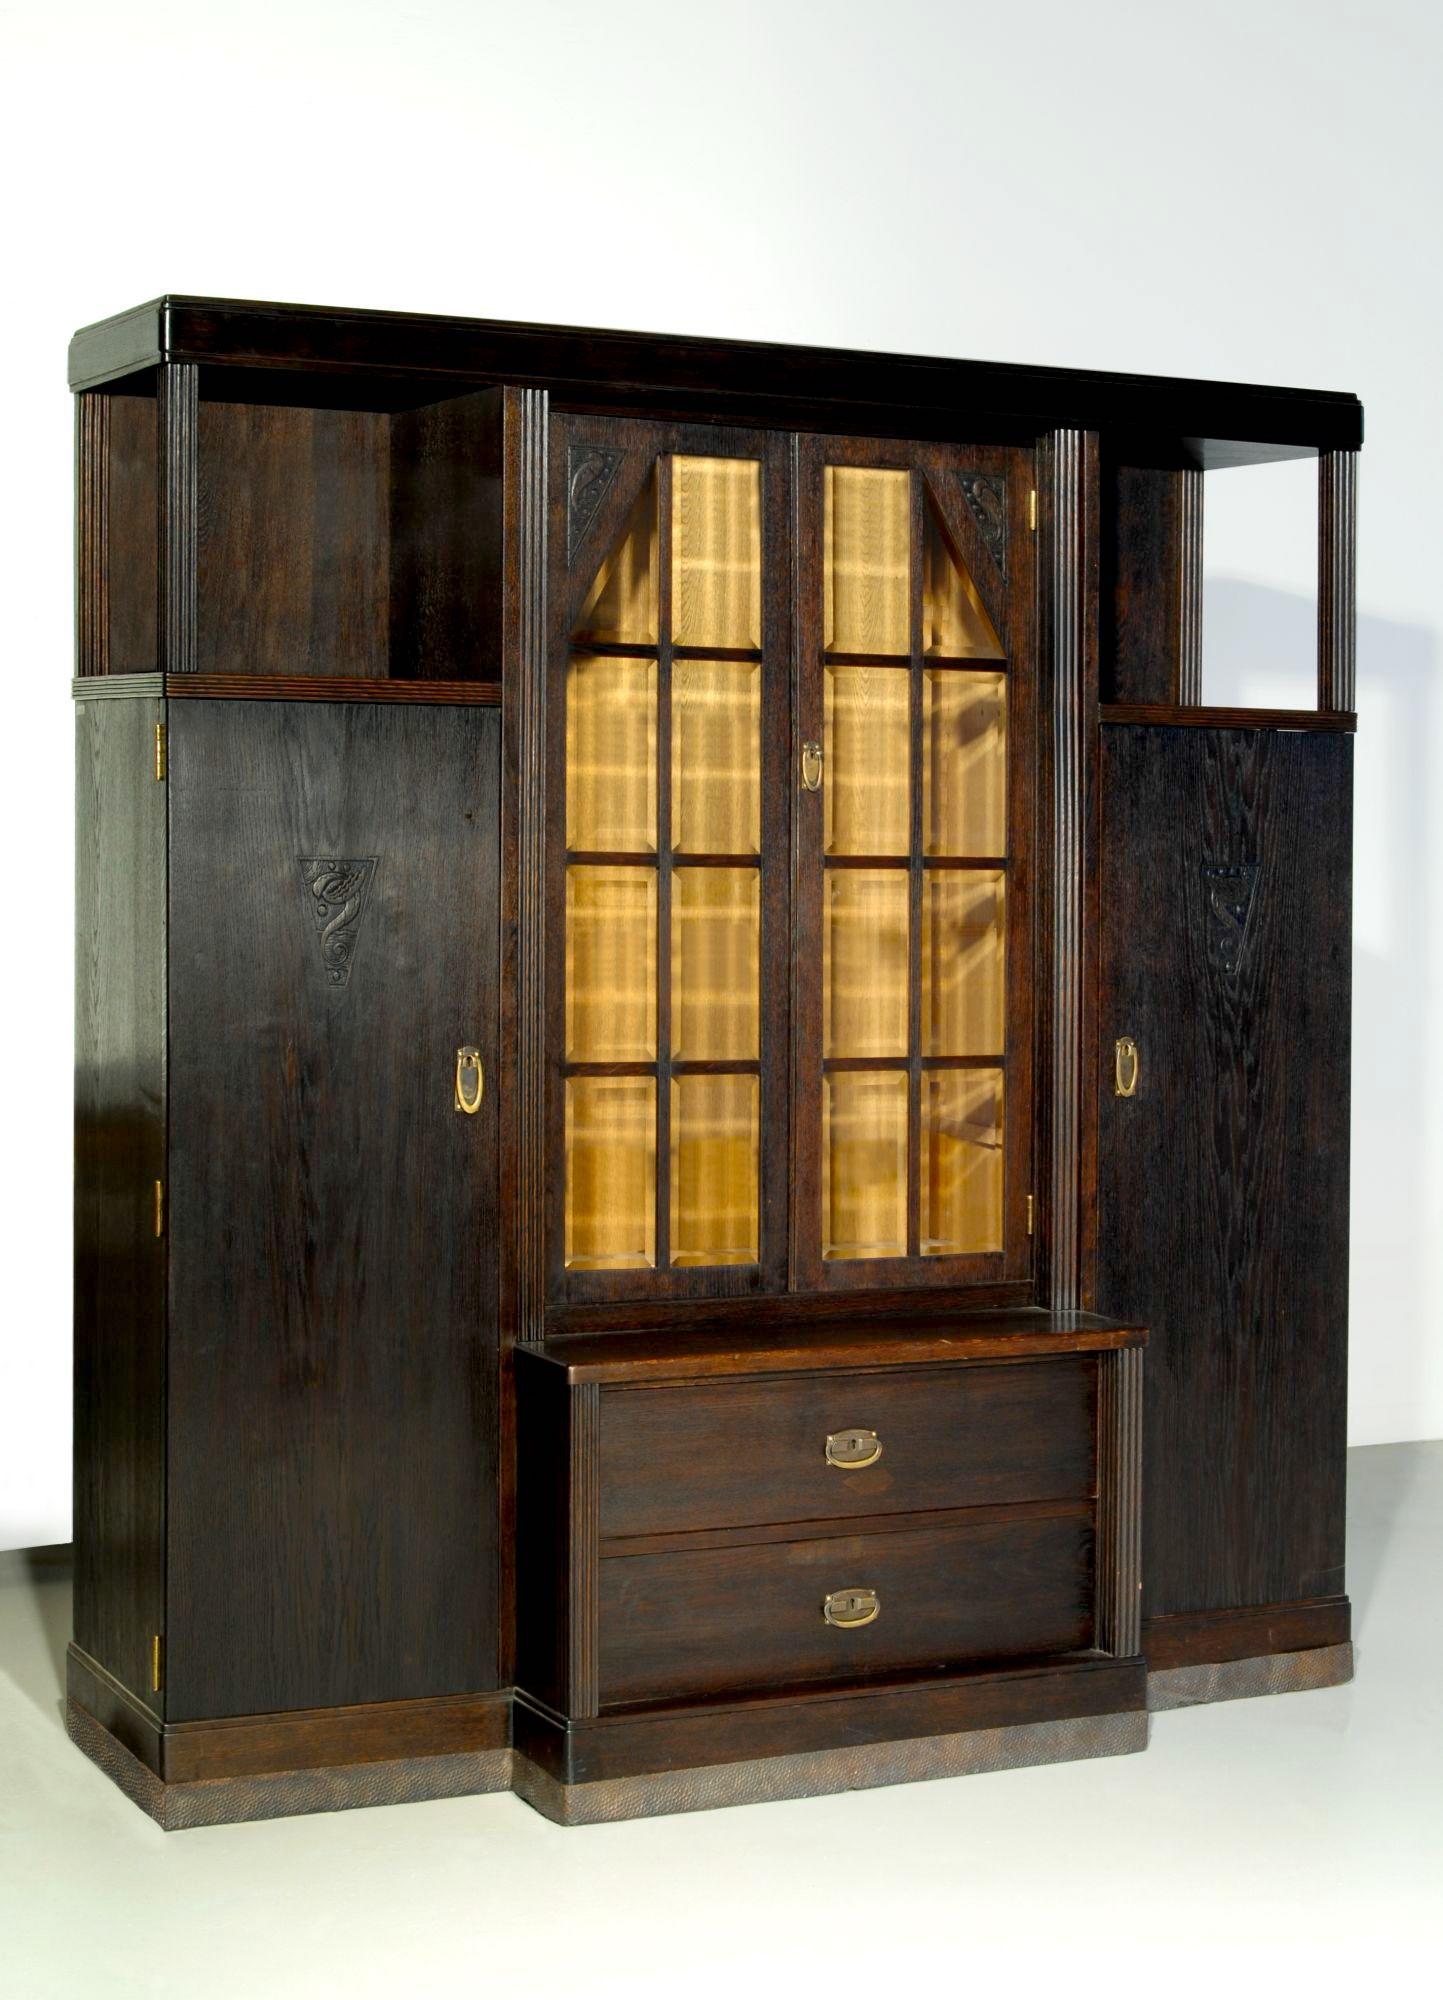 Austro-Hungarian Wiener Werkstätte period bookcase , made around 1905, attributed to Koós Károly (Hungarian architect and designer), decorated with hand carved elements, such as birds and river. Made of polished oak, hand hammered red copper ,